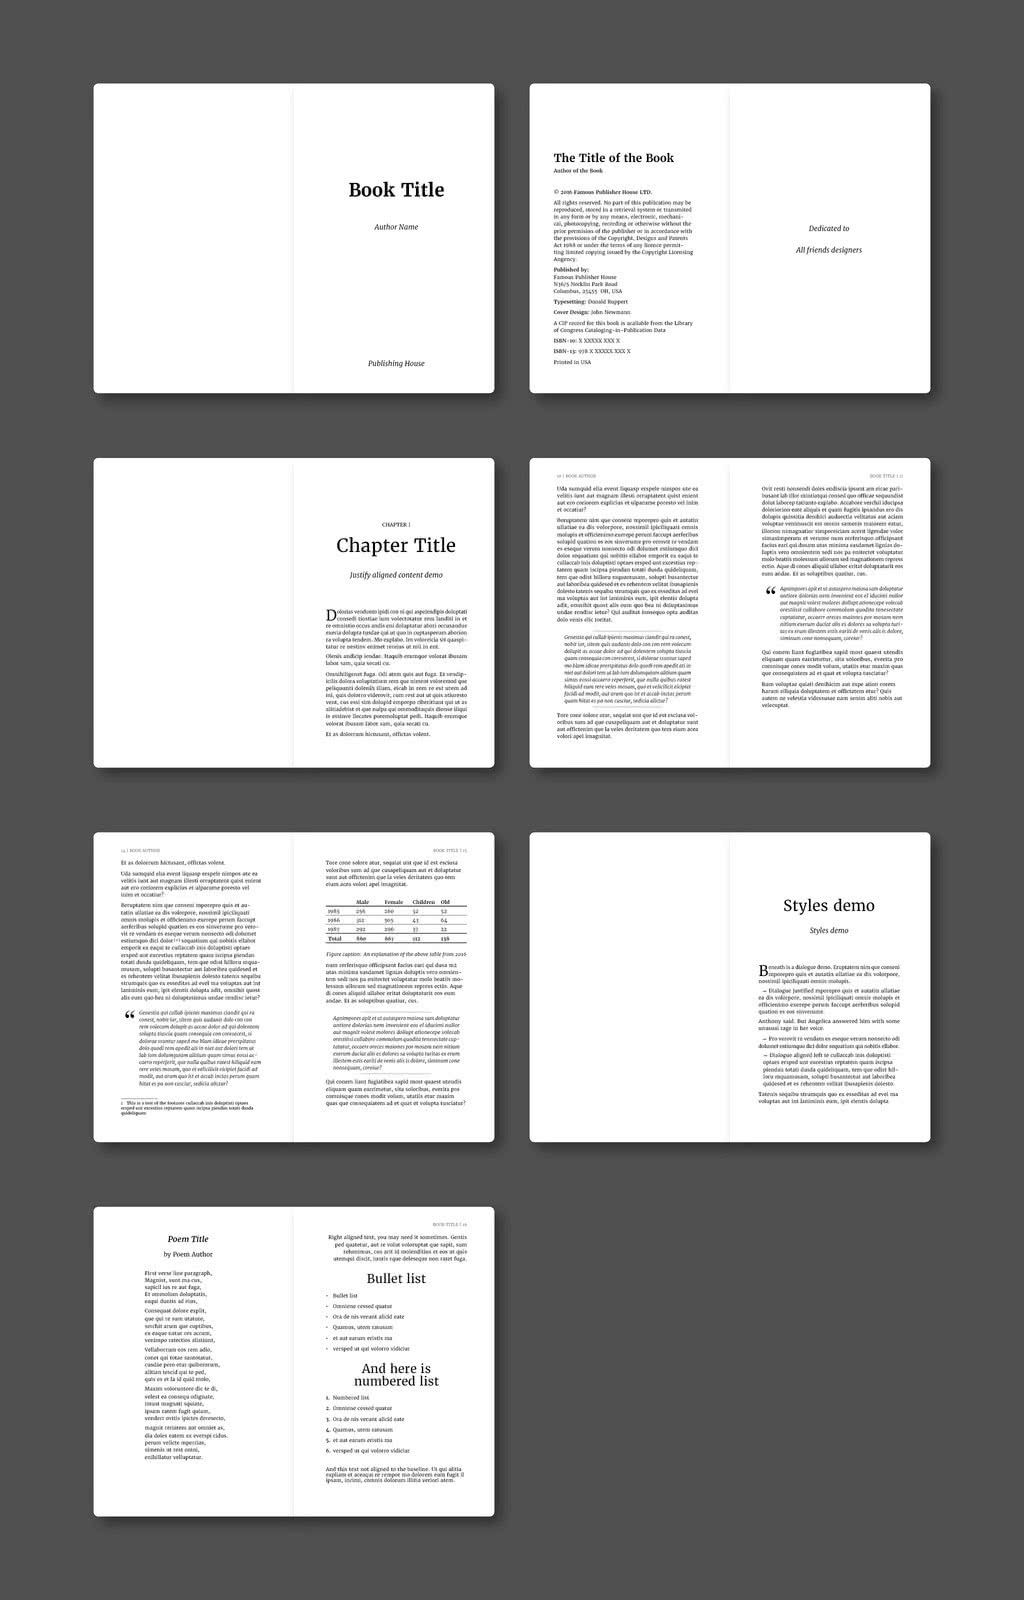 75 Fresh Indesign Templates And Where To Find More With Regard To Indesign Presentation Templates